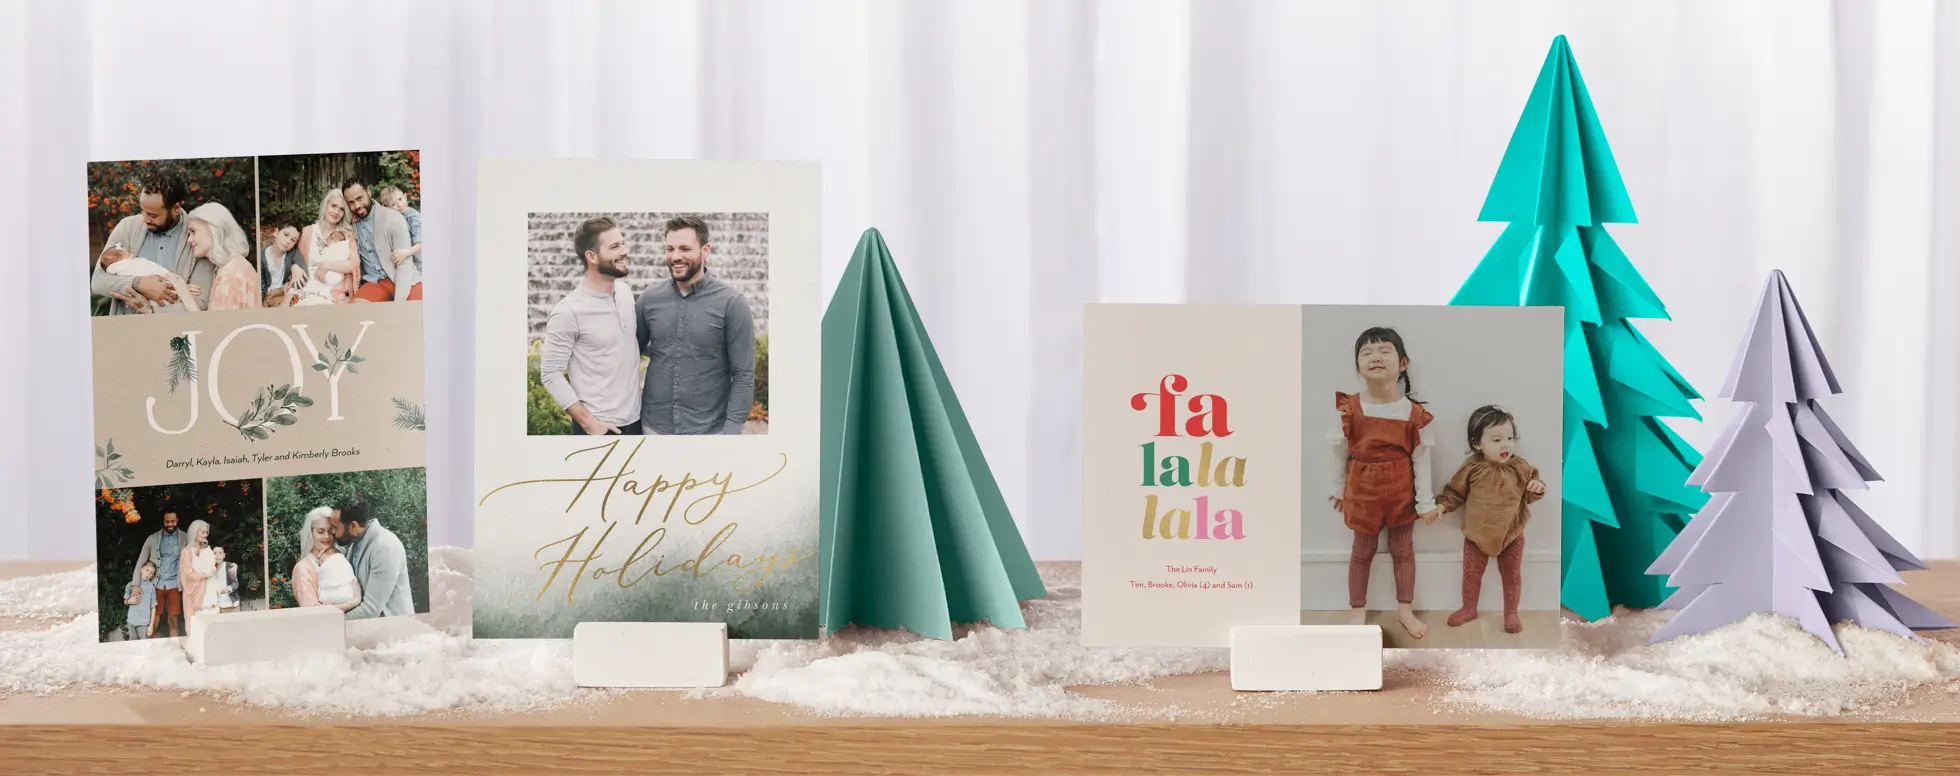 All_Holiday_Cards